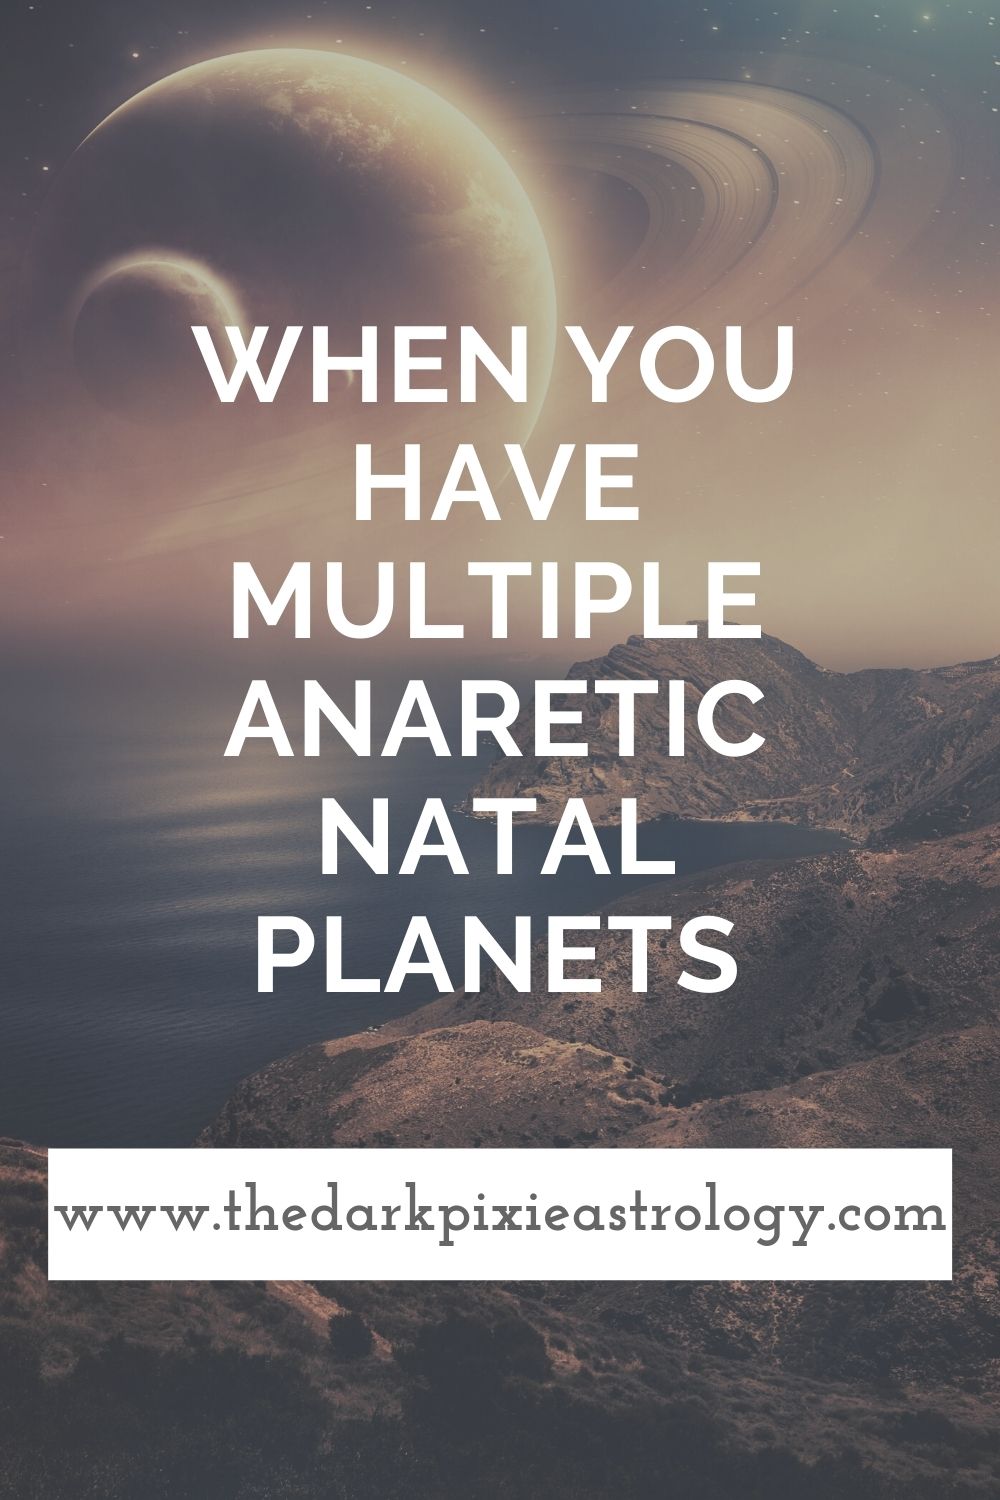 When You Have Multiple Anaretic Natal Planets - The Dark Pixie Astrology